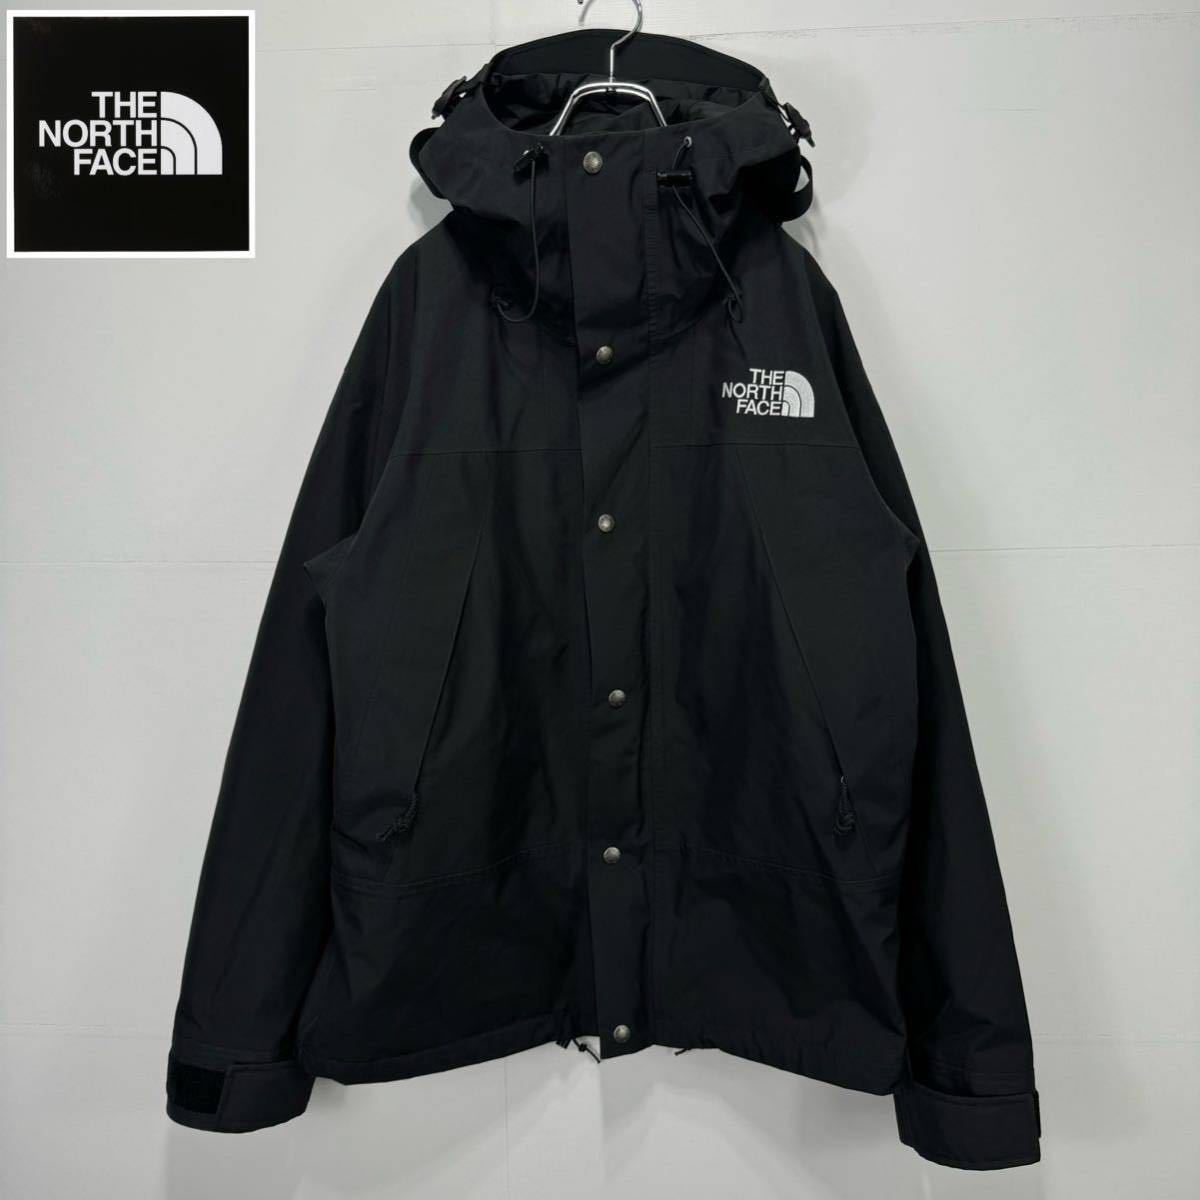 THE NORTH FACE ノースフェイス 1990 MOUNTAIN JACKET GORE-TEX NP2182 